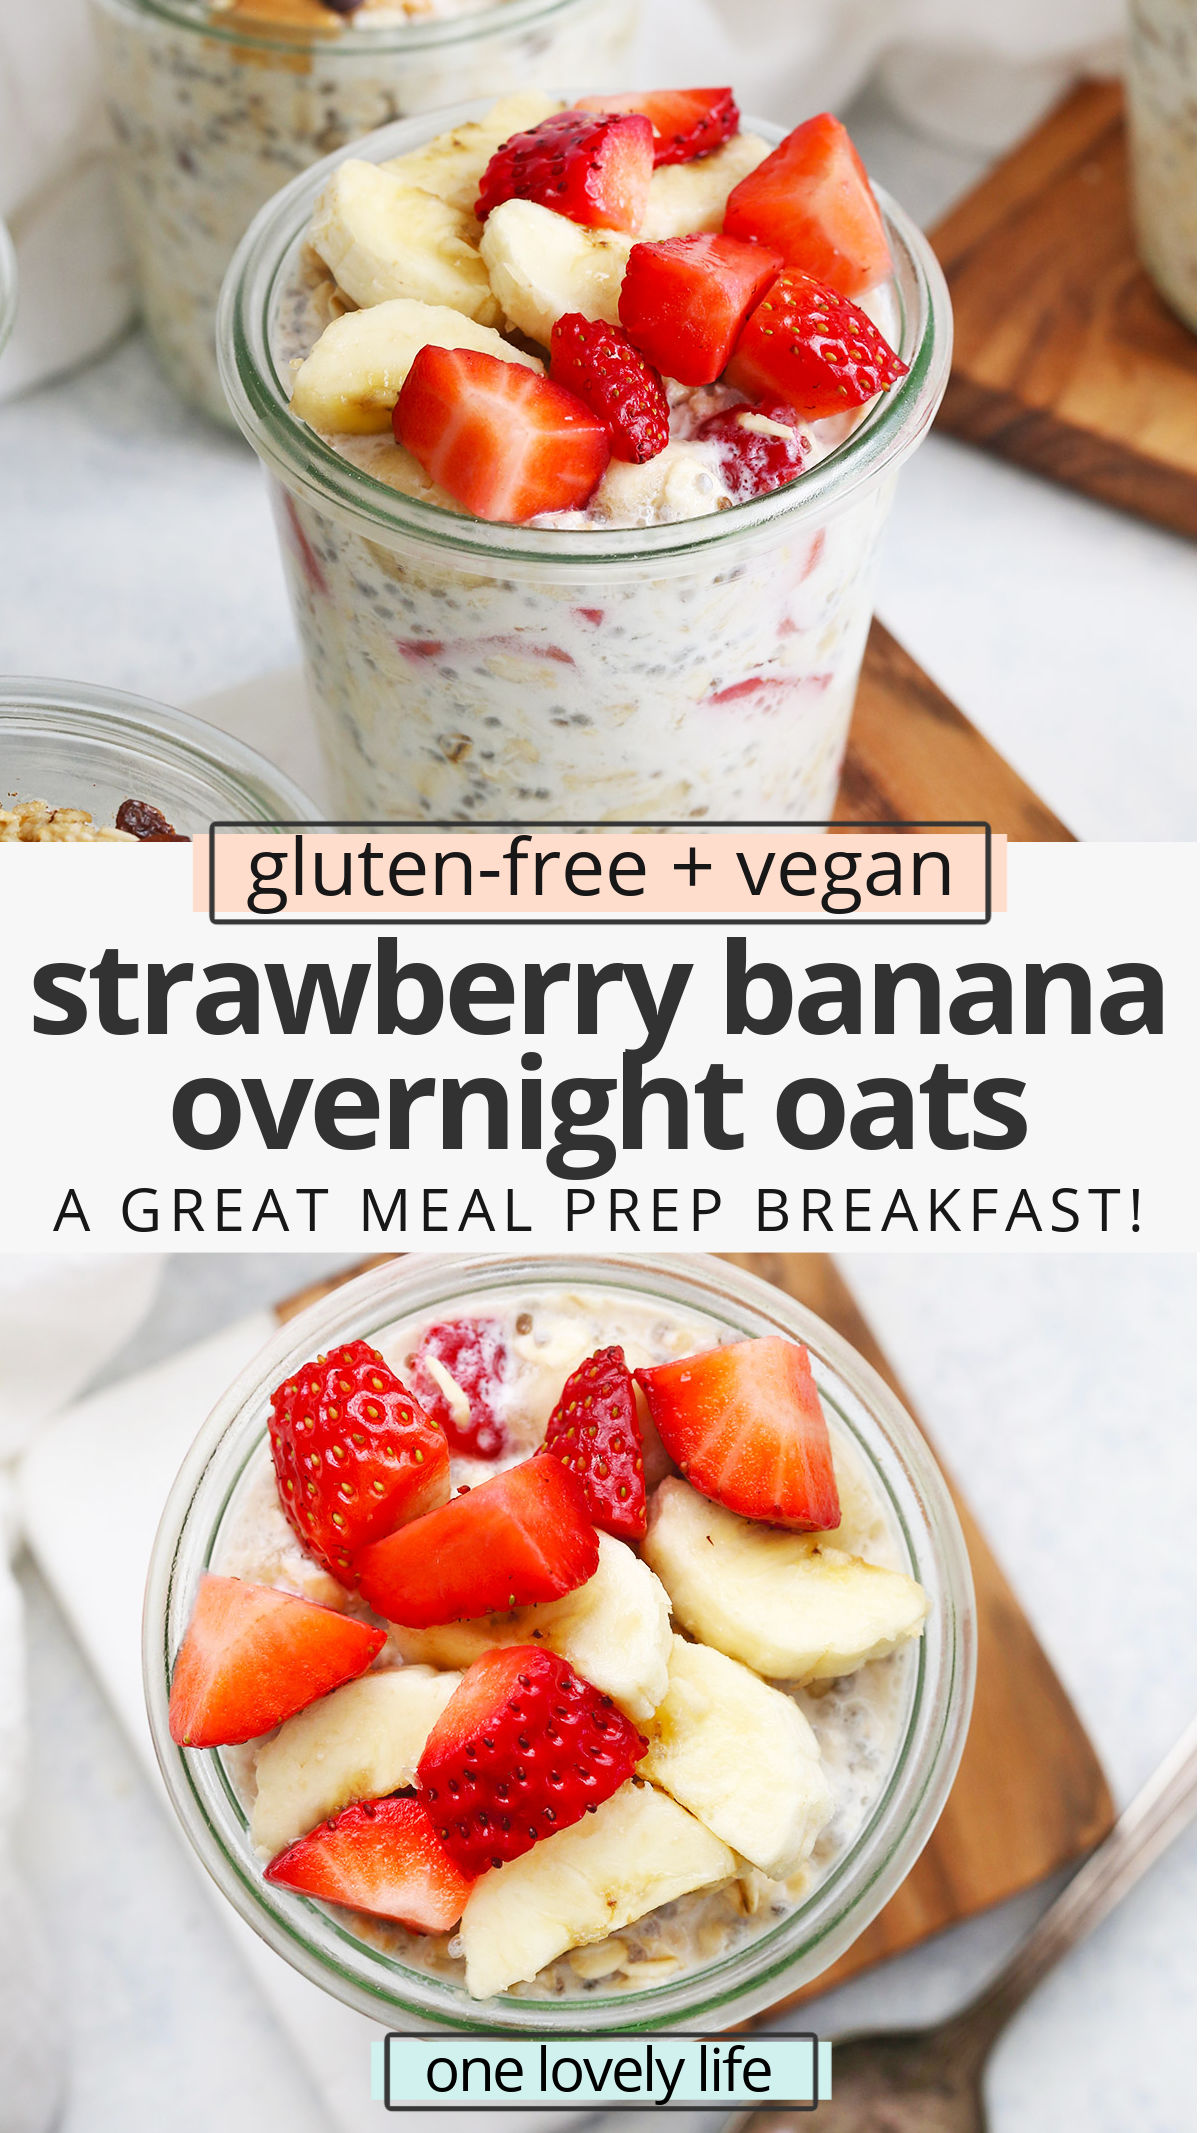 Strawberry Banana Overnight Oats - Creamy overnight oats with bananas and fresh strawberries. This strawberry overnight oats recipe is delicious on a busy morning! (Gluten-free, vegan) // Meal Prep Breakfast // Strawberry Overnight Oats // Healthy Breakfast / strawberry overnight oats recipe / healthy breakfast ideas / gluten free breakfast / vegan breakfast / strawberry overnight oatmeal